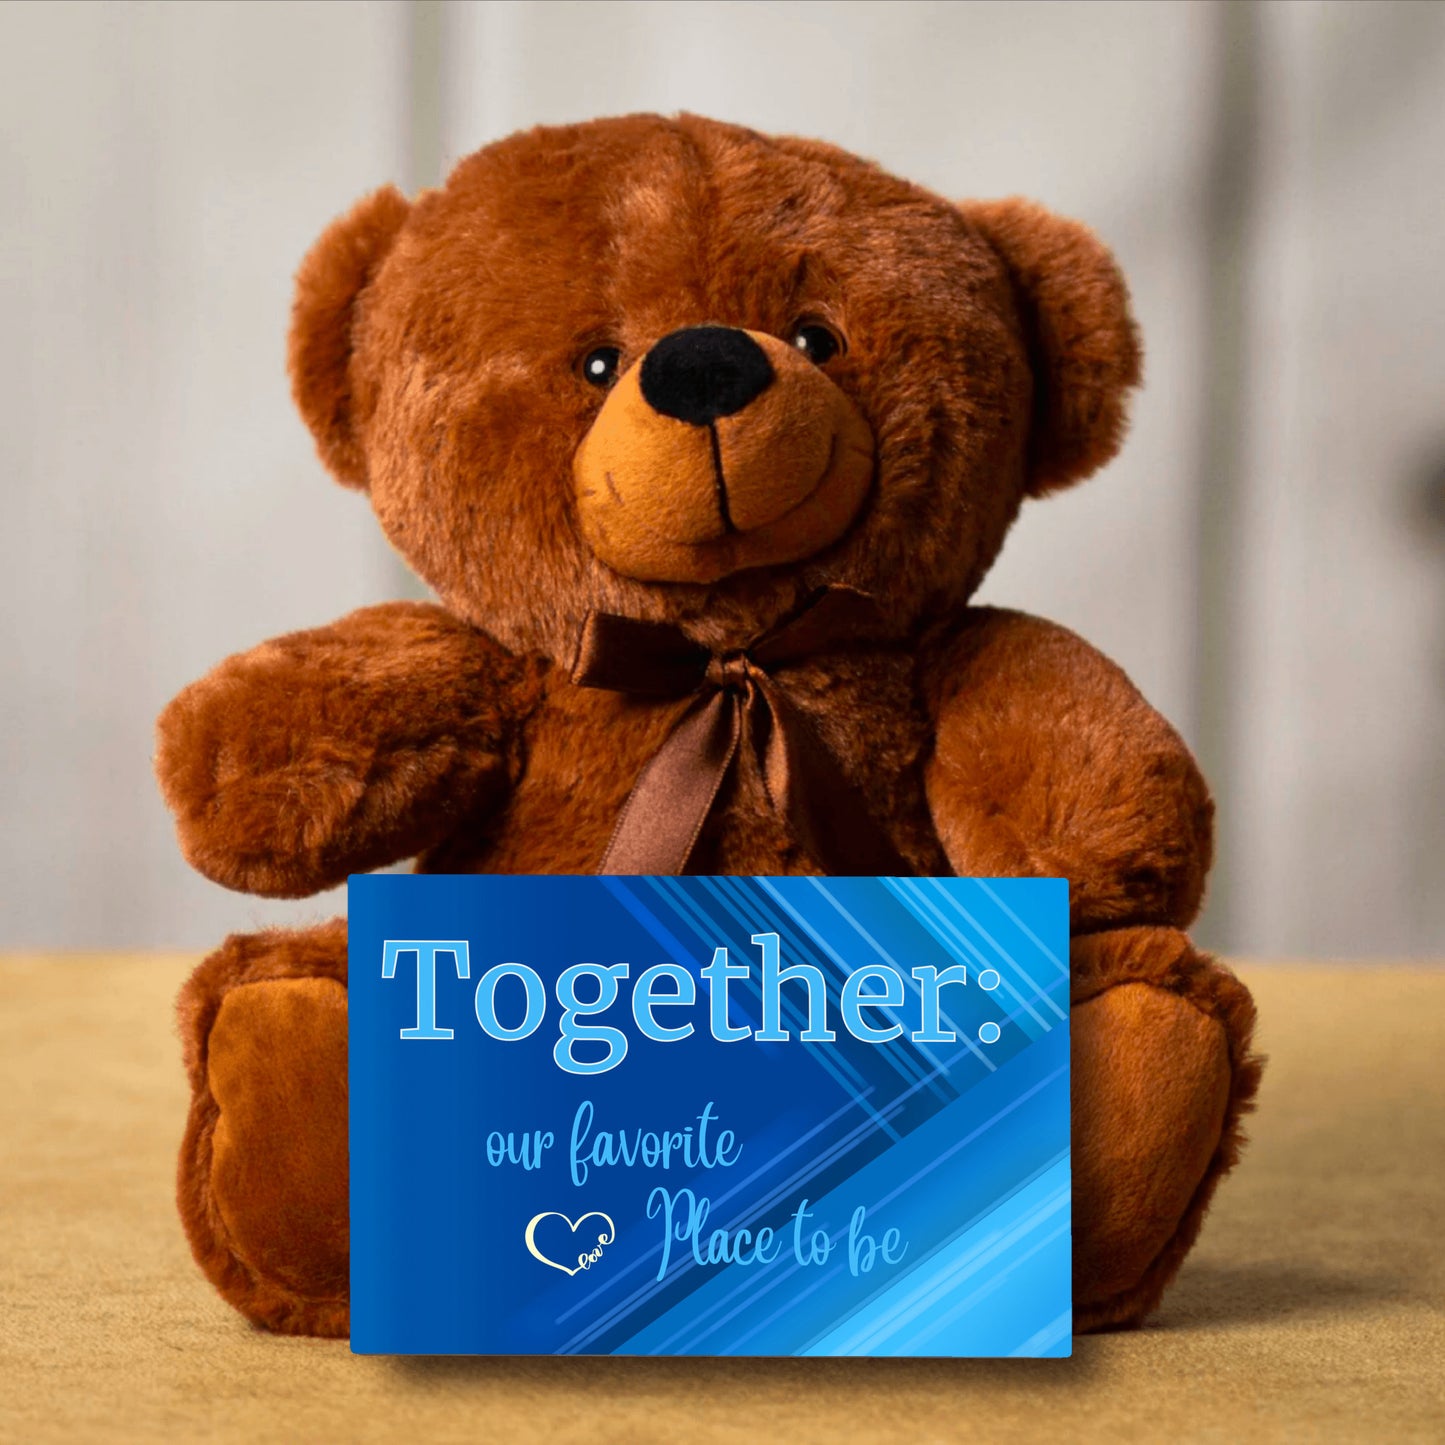 Together: our favorite place to be - teddy bear, Gift, Valentine's, Anniversary